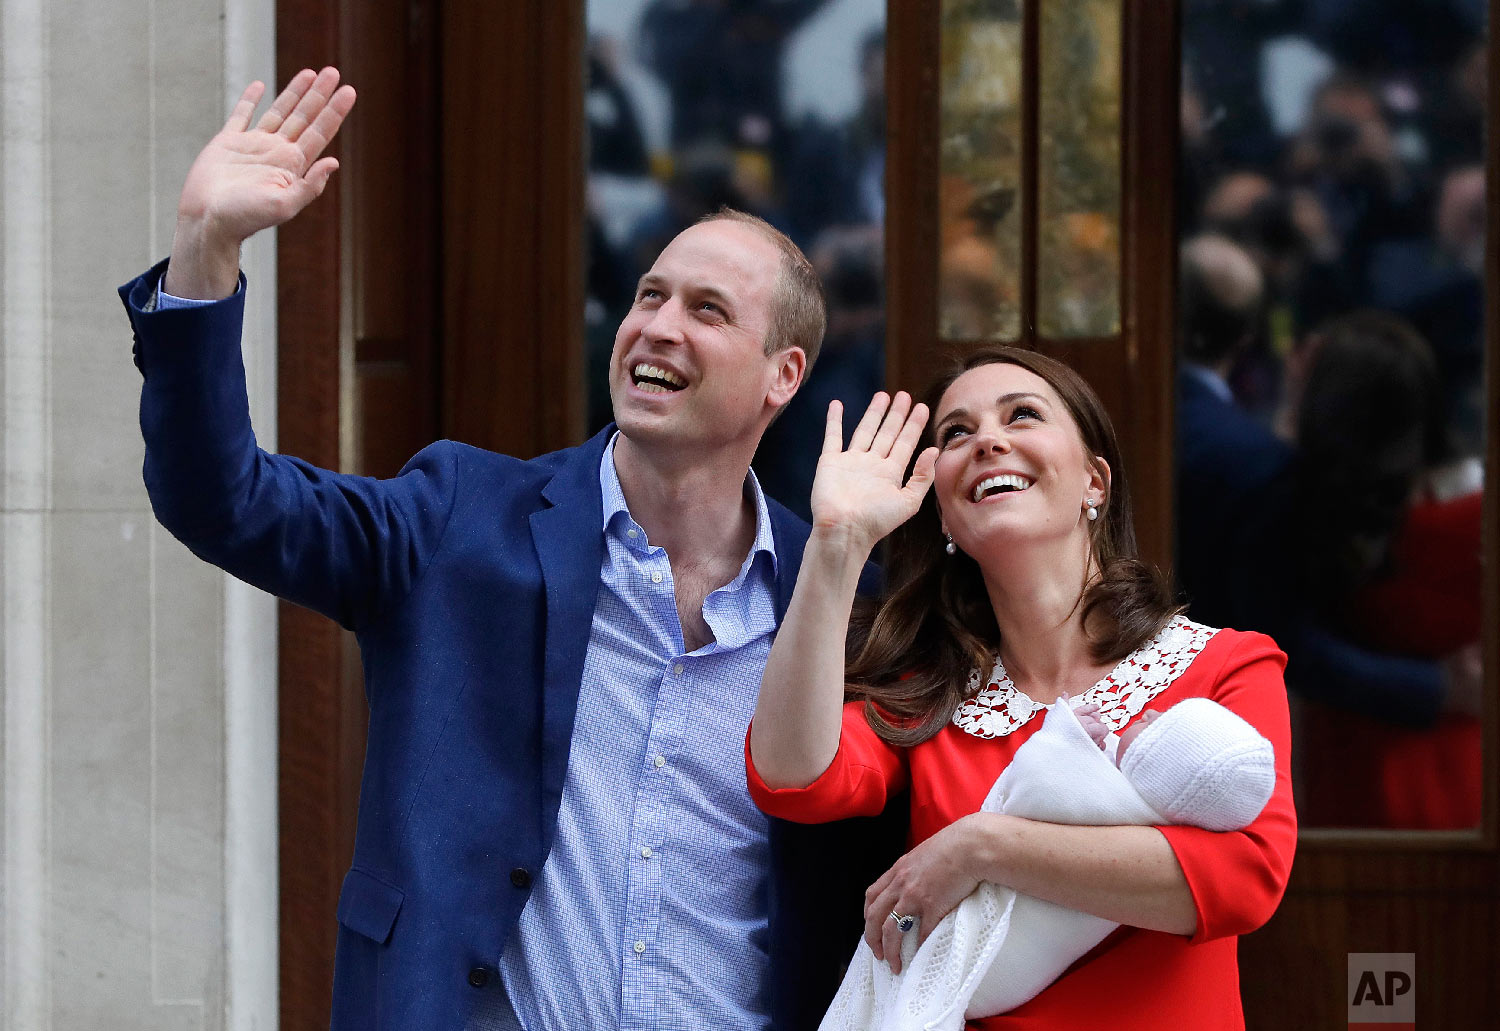  Britain's Prince William and Kate, Duchess of Cambridge wave holding their newborn baby son as they leave the Lindo wing at St Mary's Hospital in London London on April 23, 2018. (AP Photo/Kirsty Wigglesworth) 